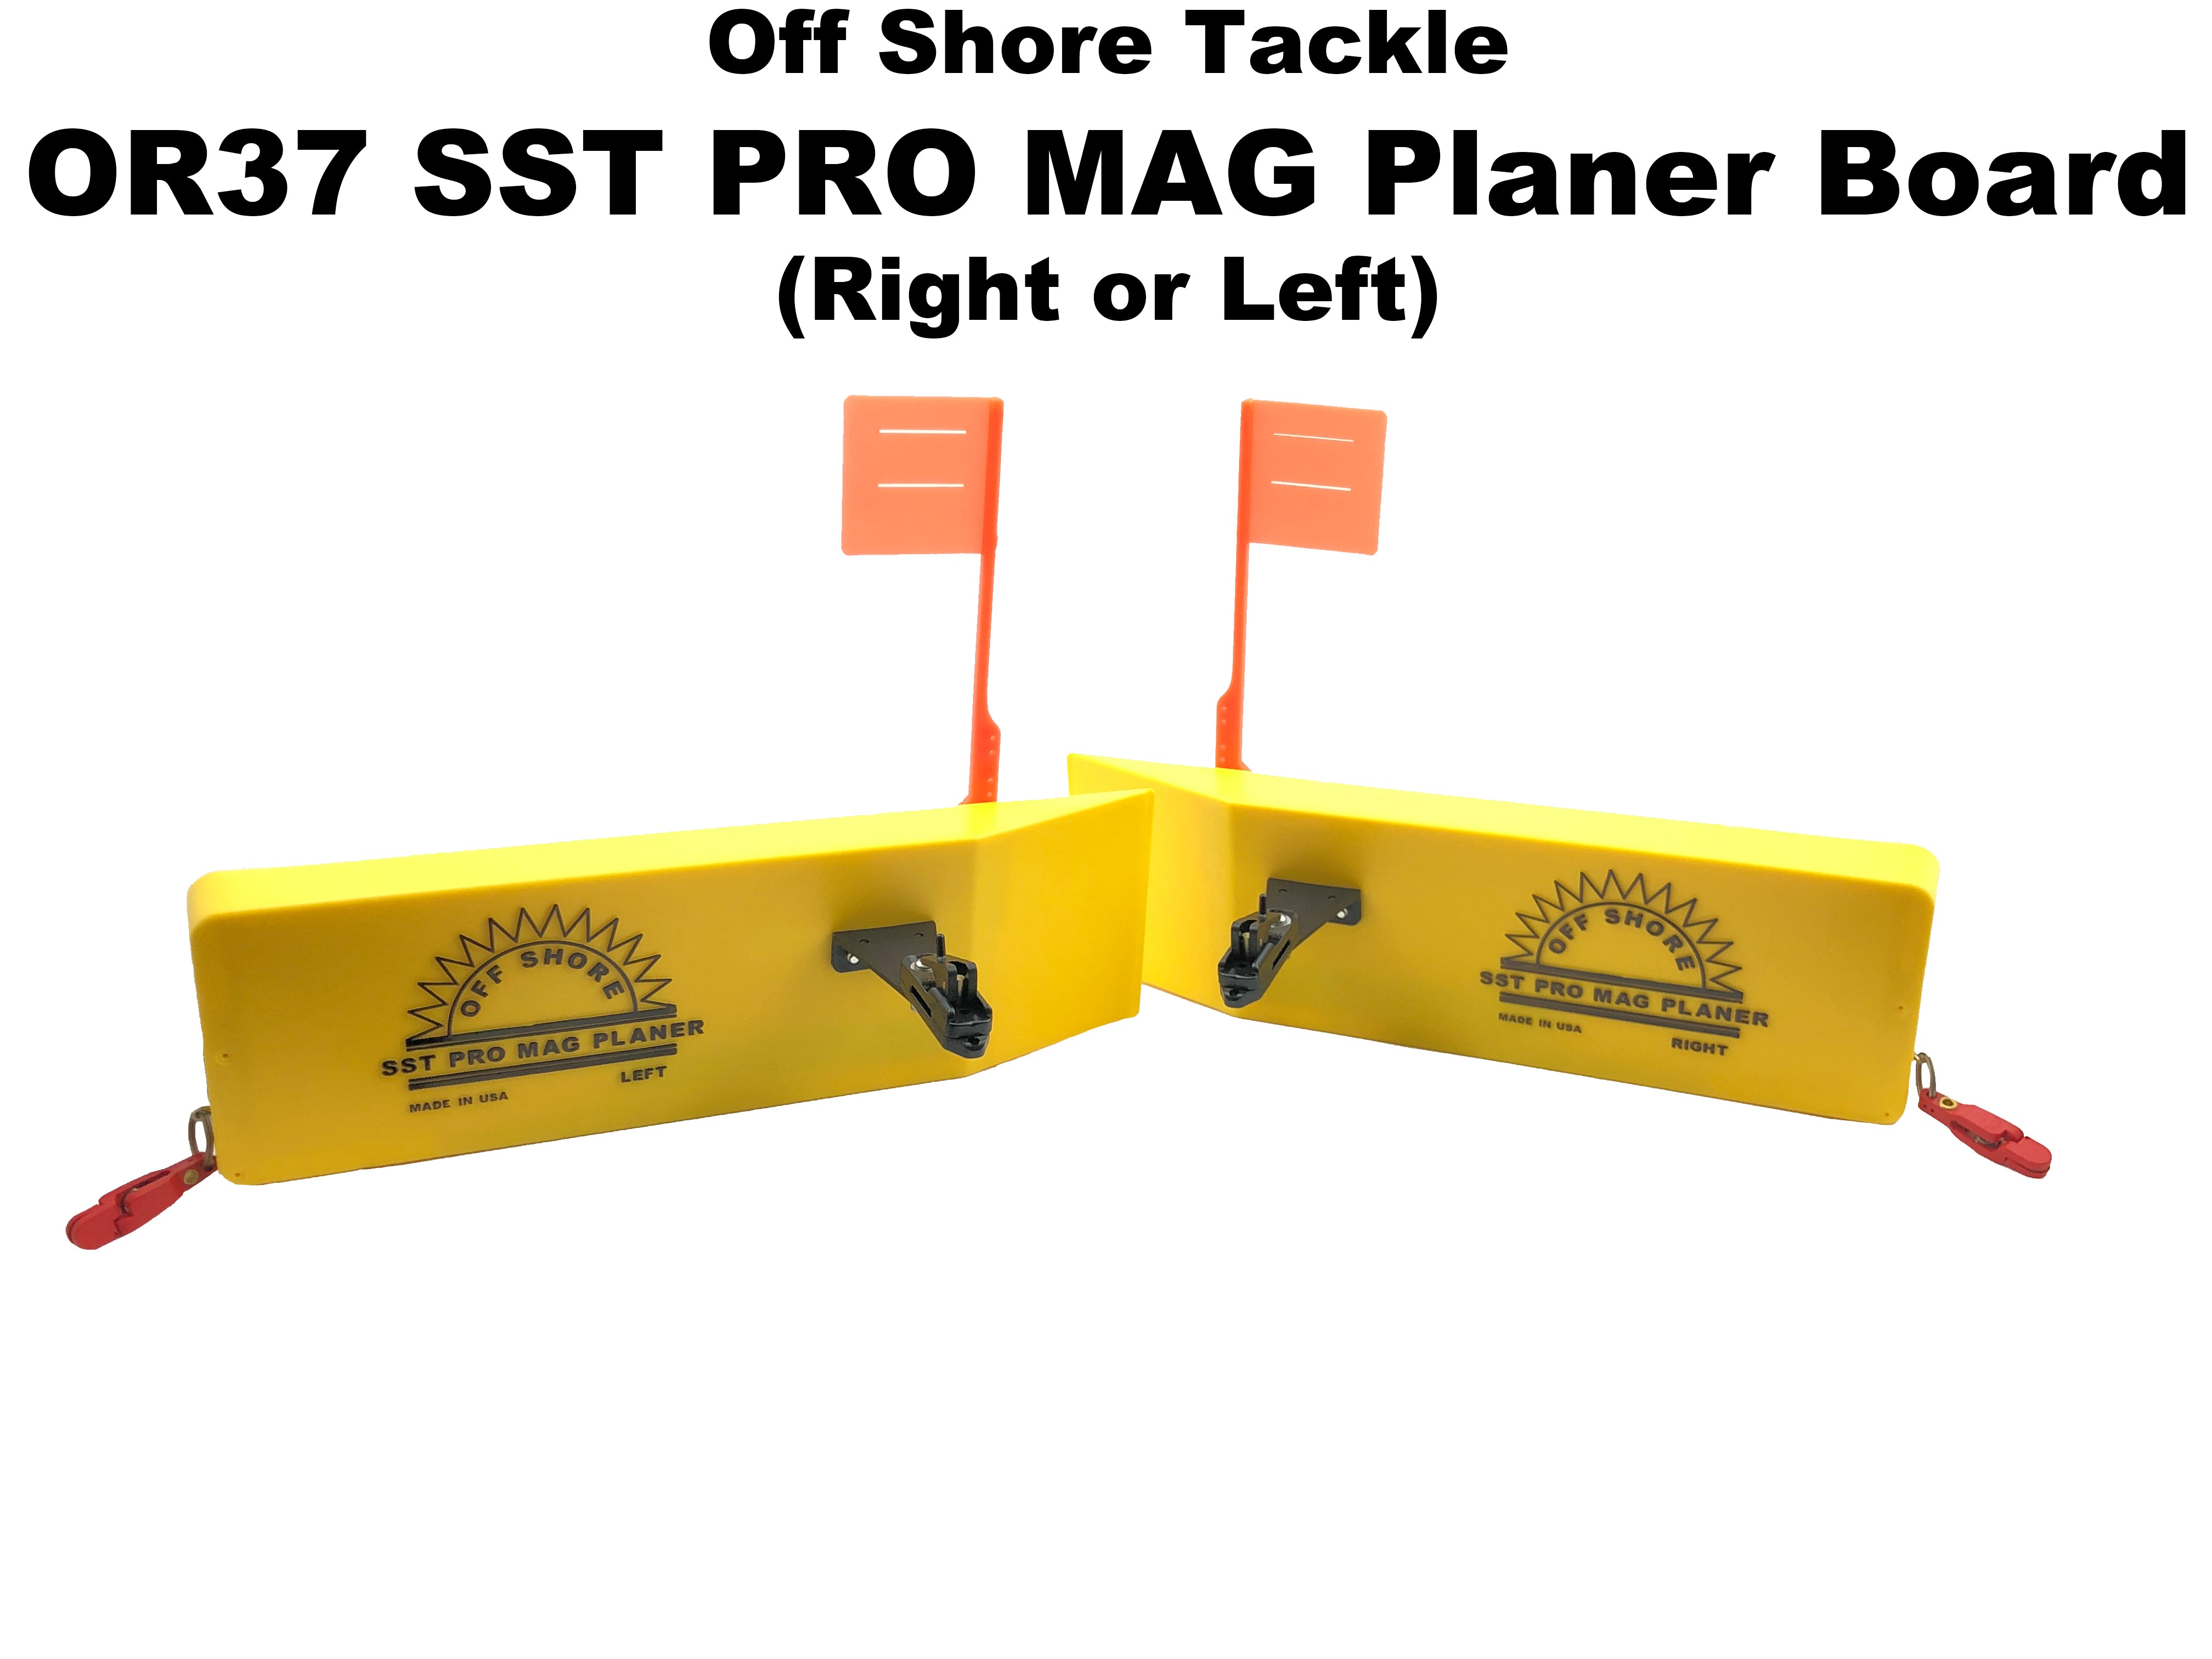 Off Shore Tackle OR37 SST PRO MAG Planer Board (Right or Left